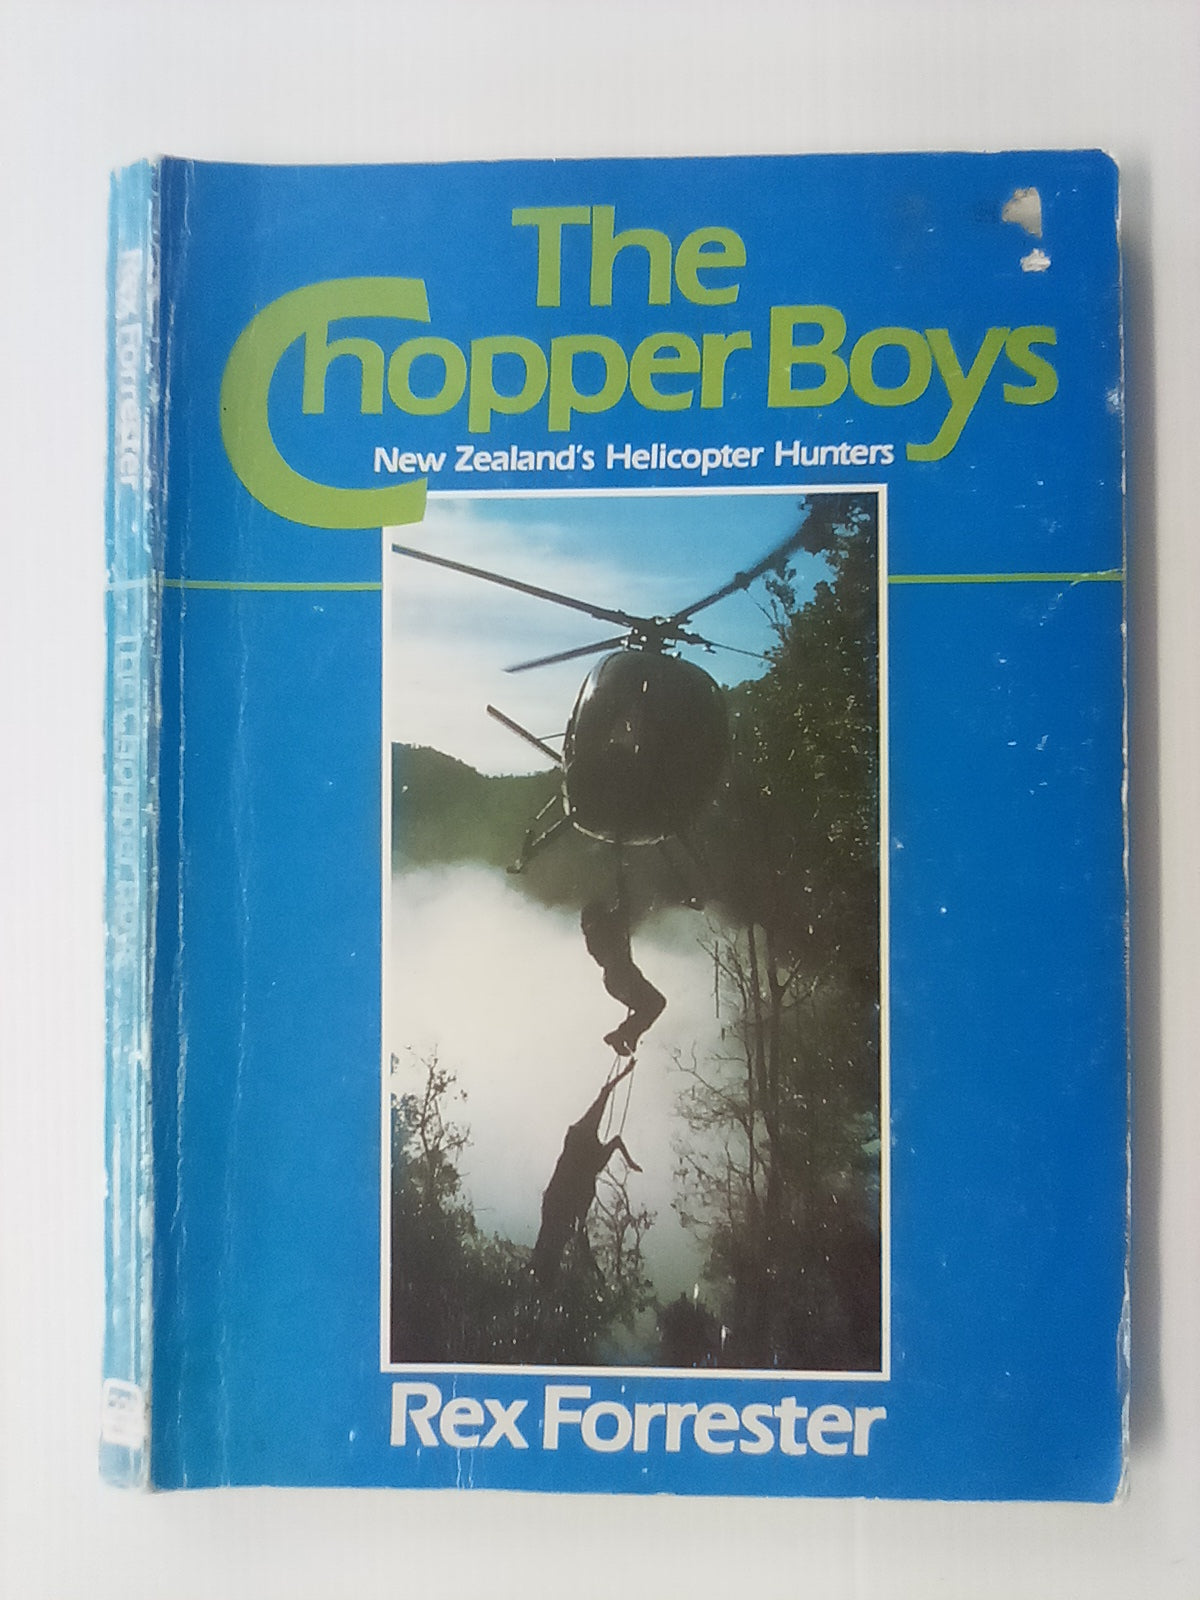 The Chopper Boys - New Zealand's Helicopter Hunters (1983) by Rex Forrester